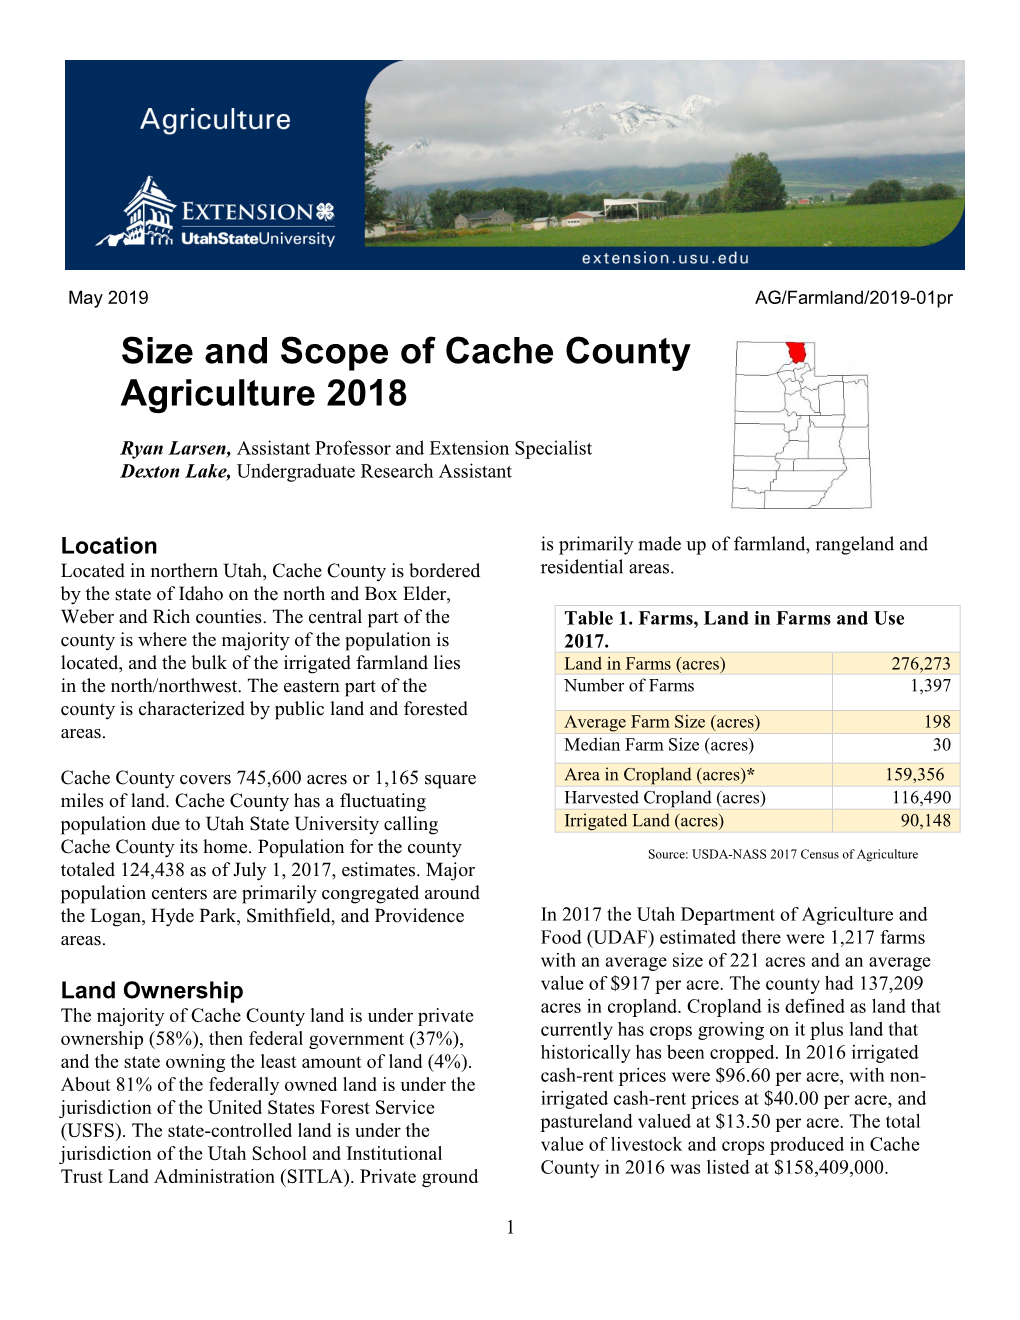 Size and Scope of Cache County Agriculture 2018